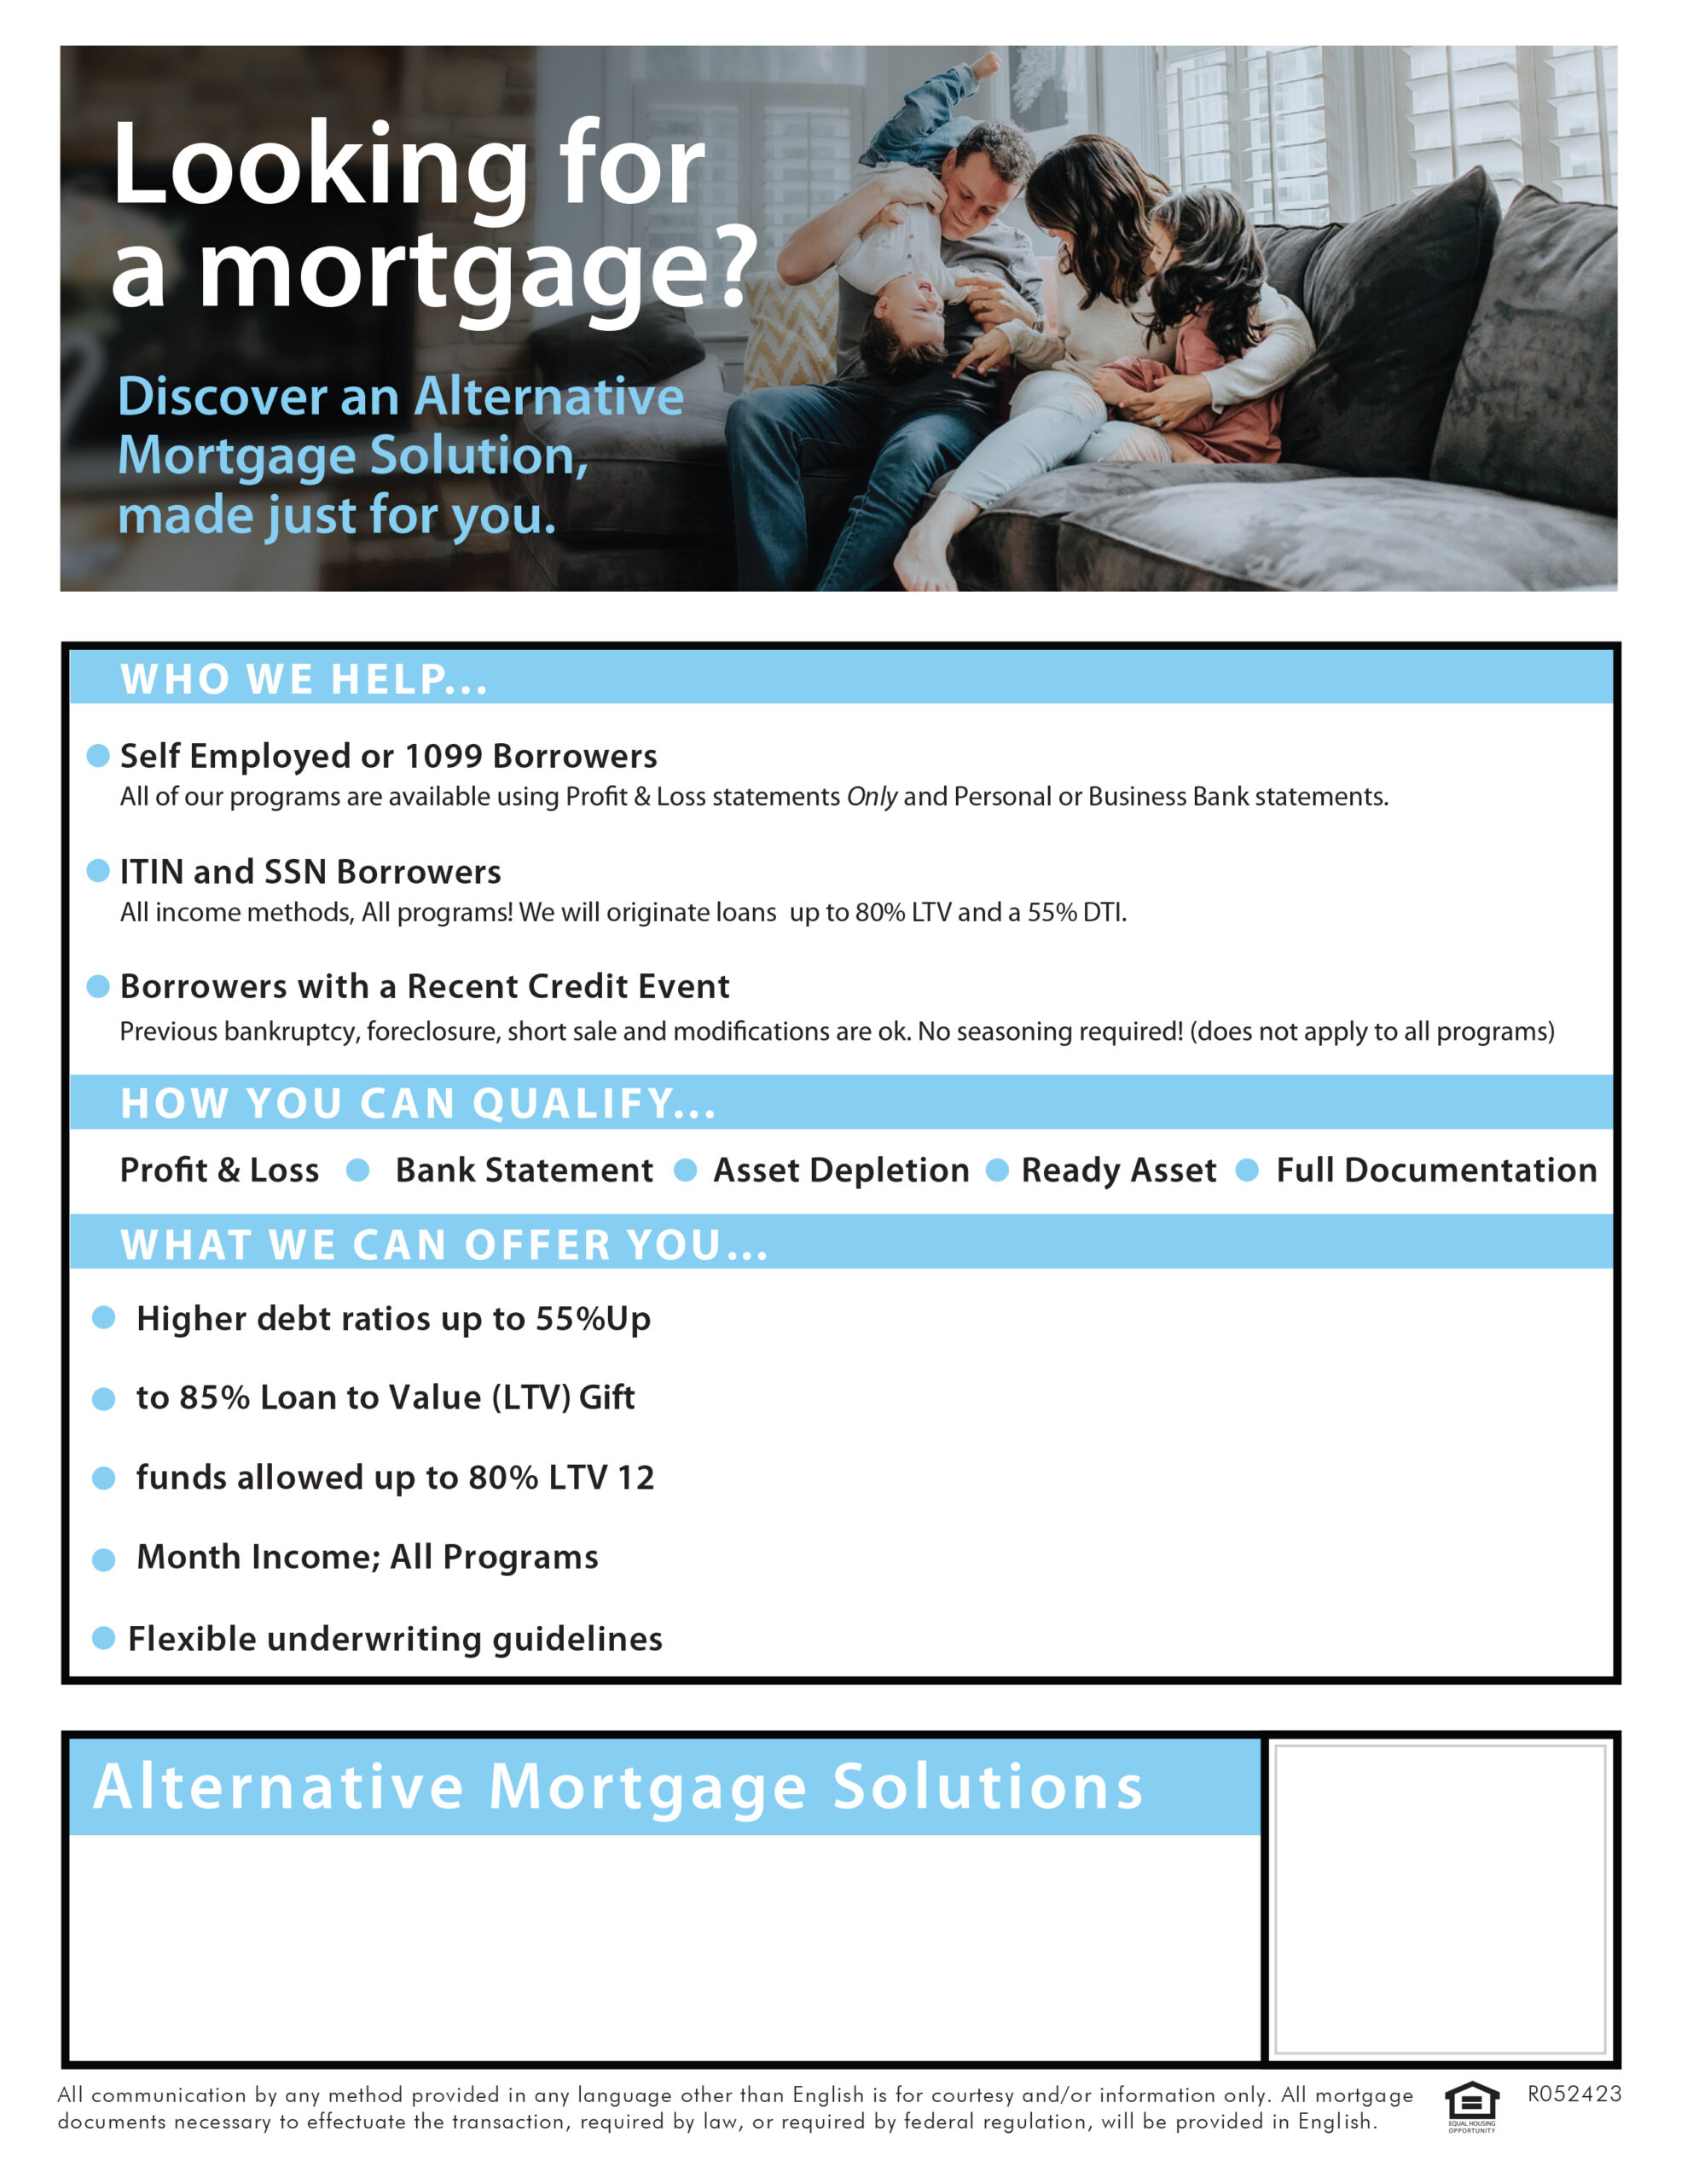 Looking for a Mortgage?